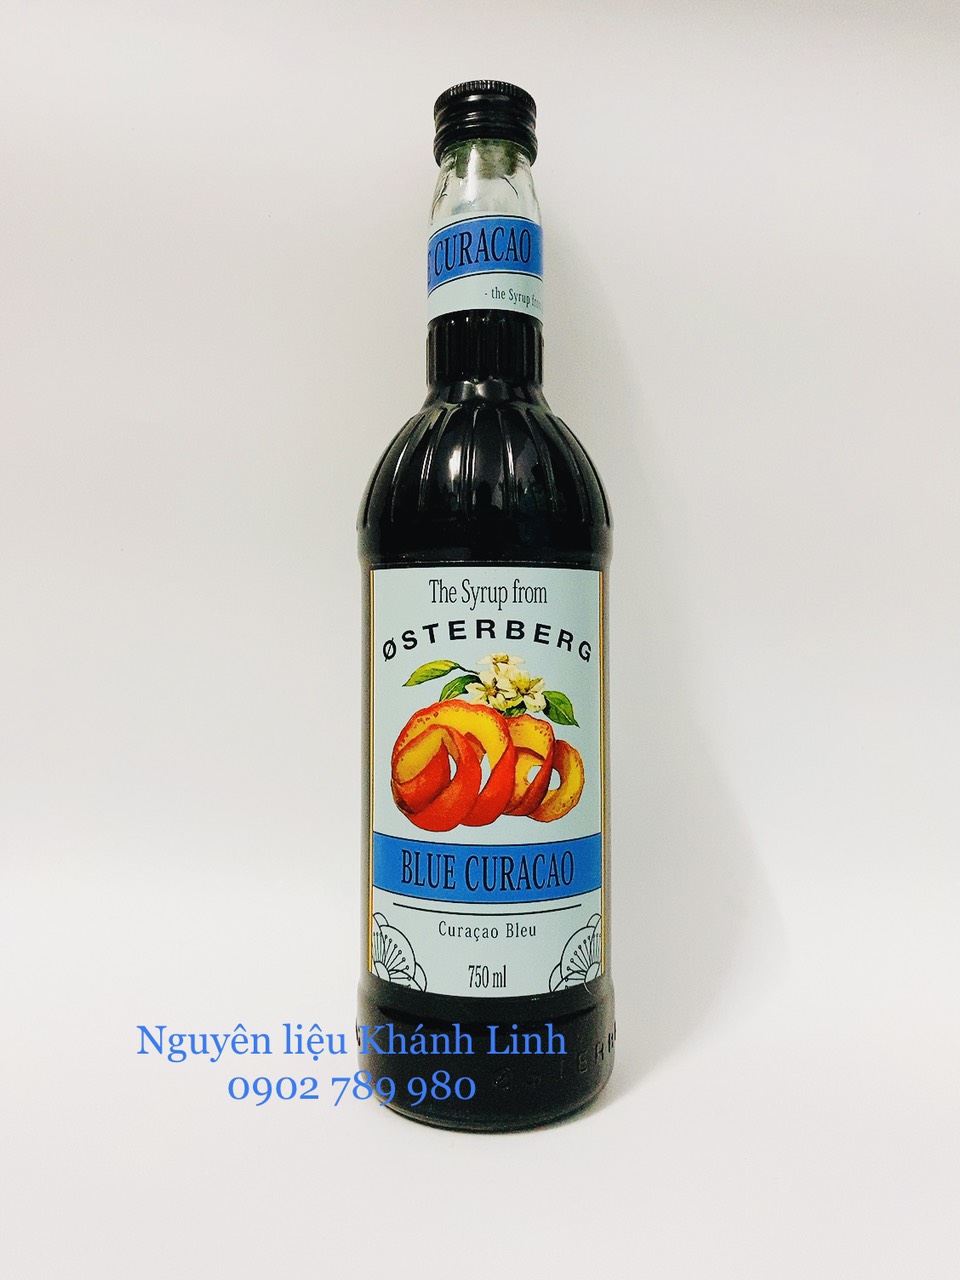 Syrup osterberg bluecuracao 750ml